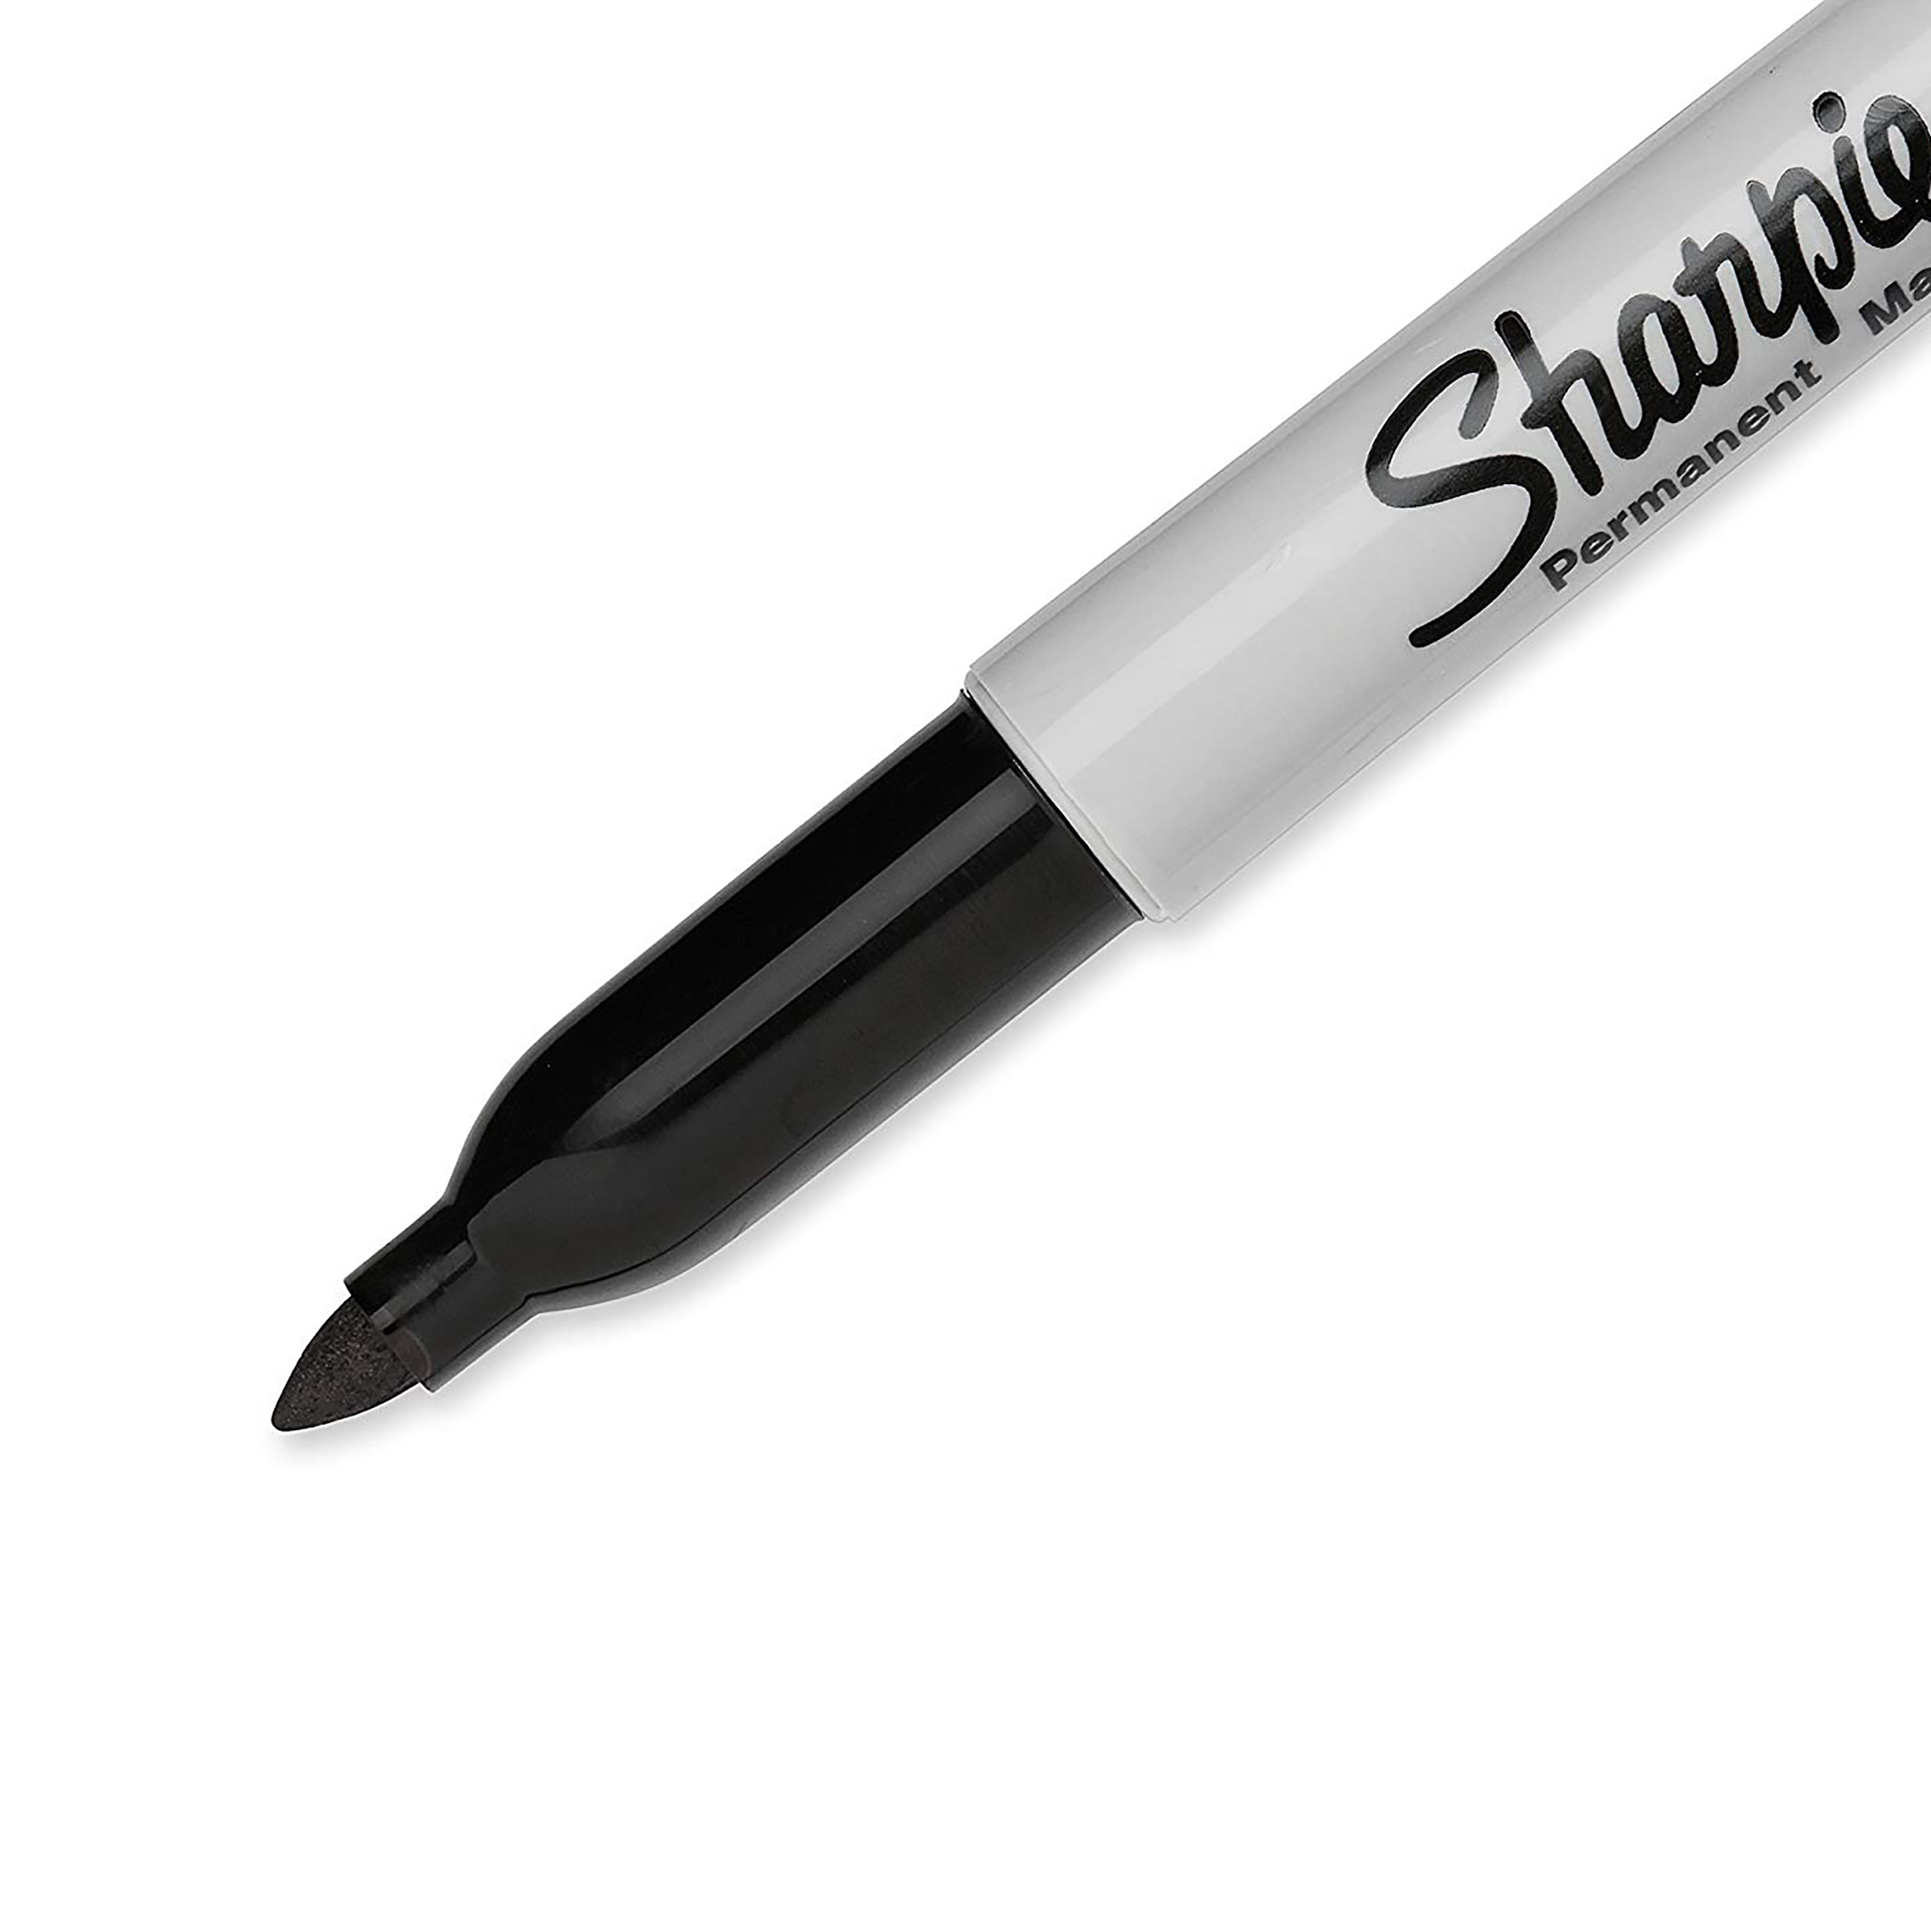 Sharpie Permanent Markers, Fine Point, Black, 5 Count - image 4 of 10